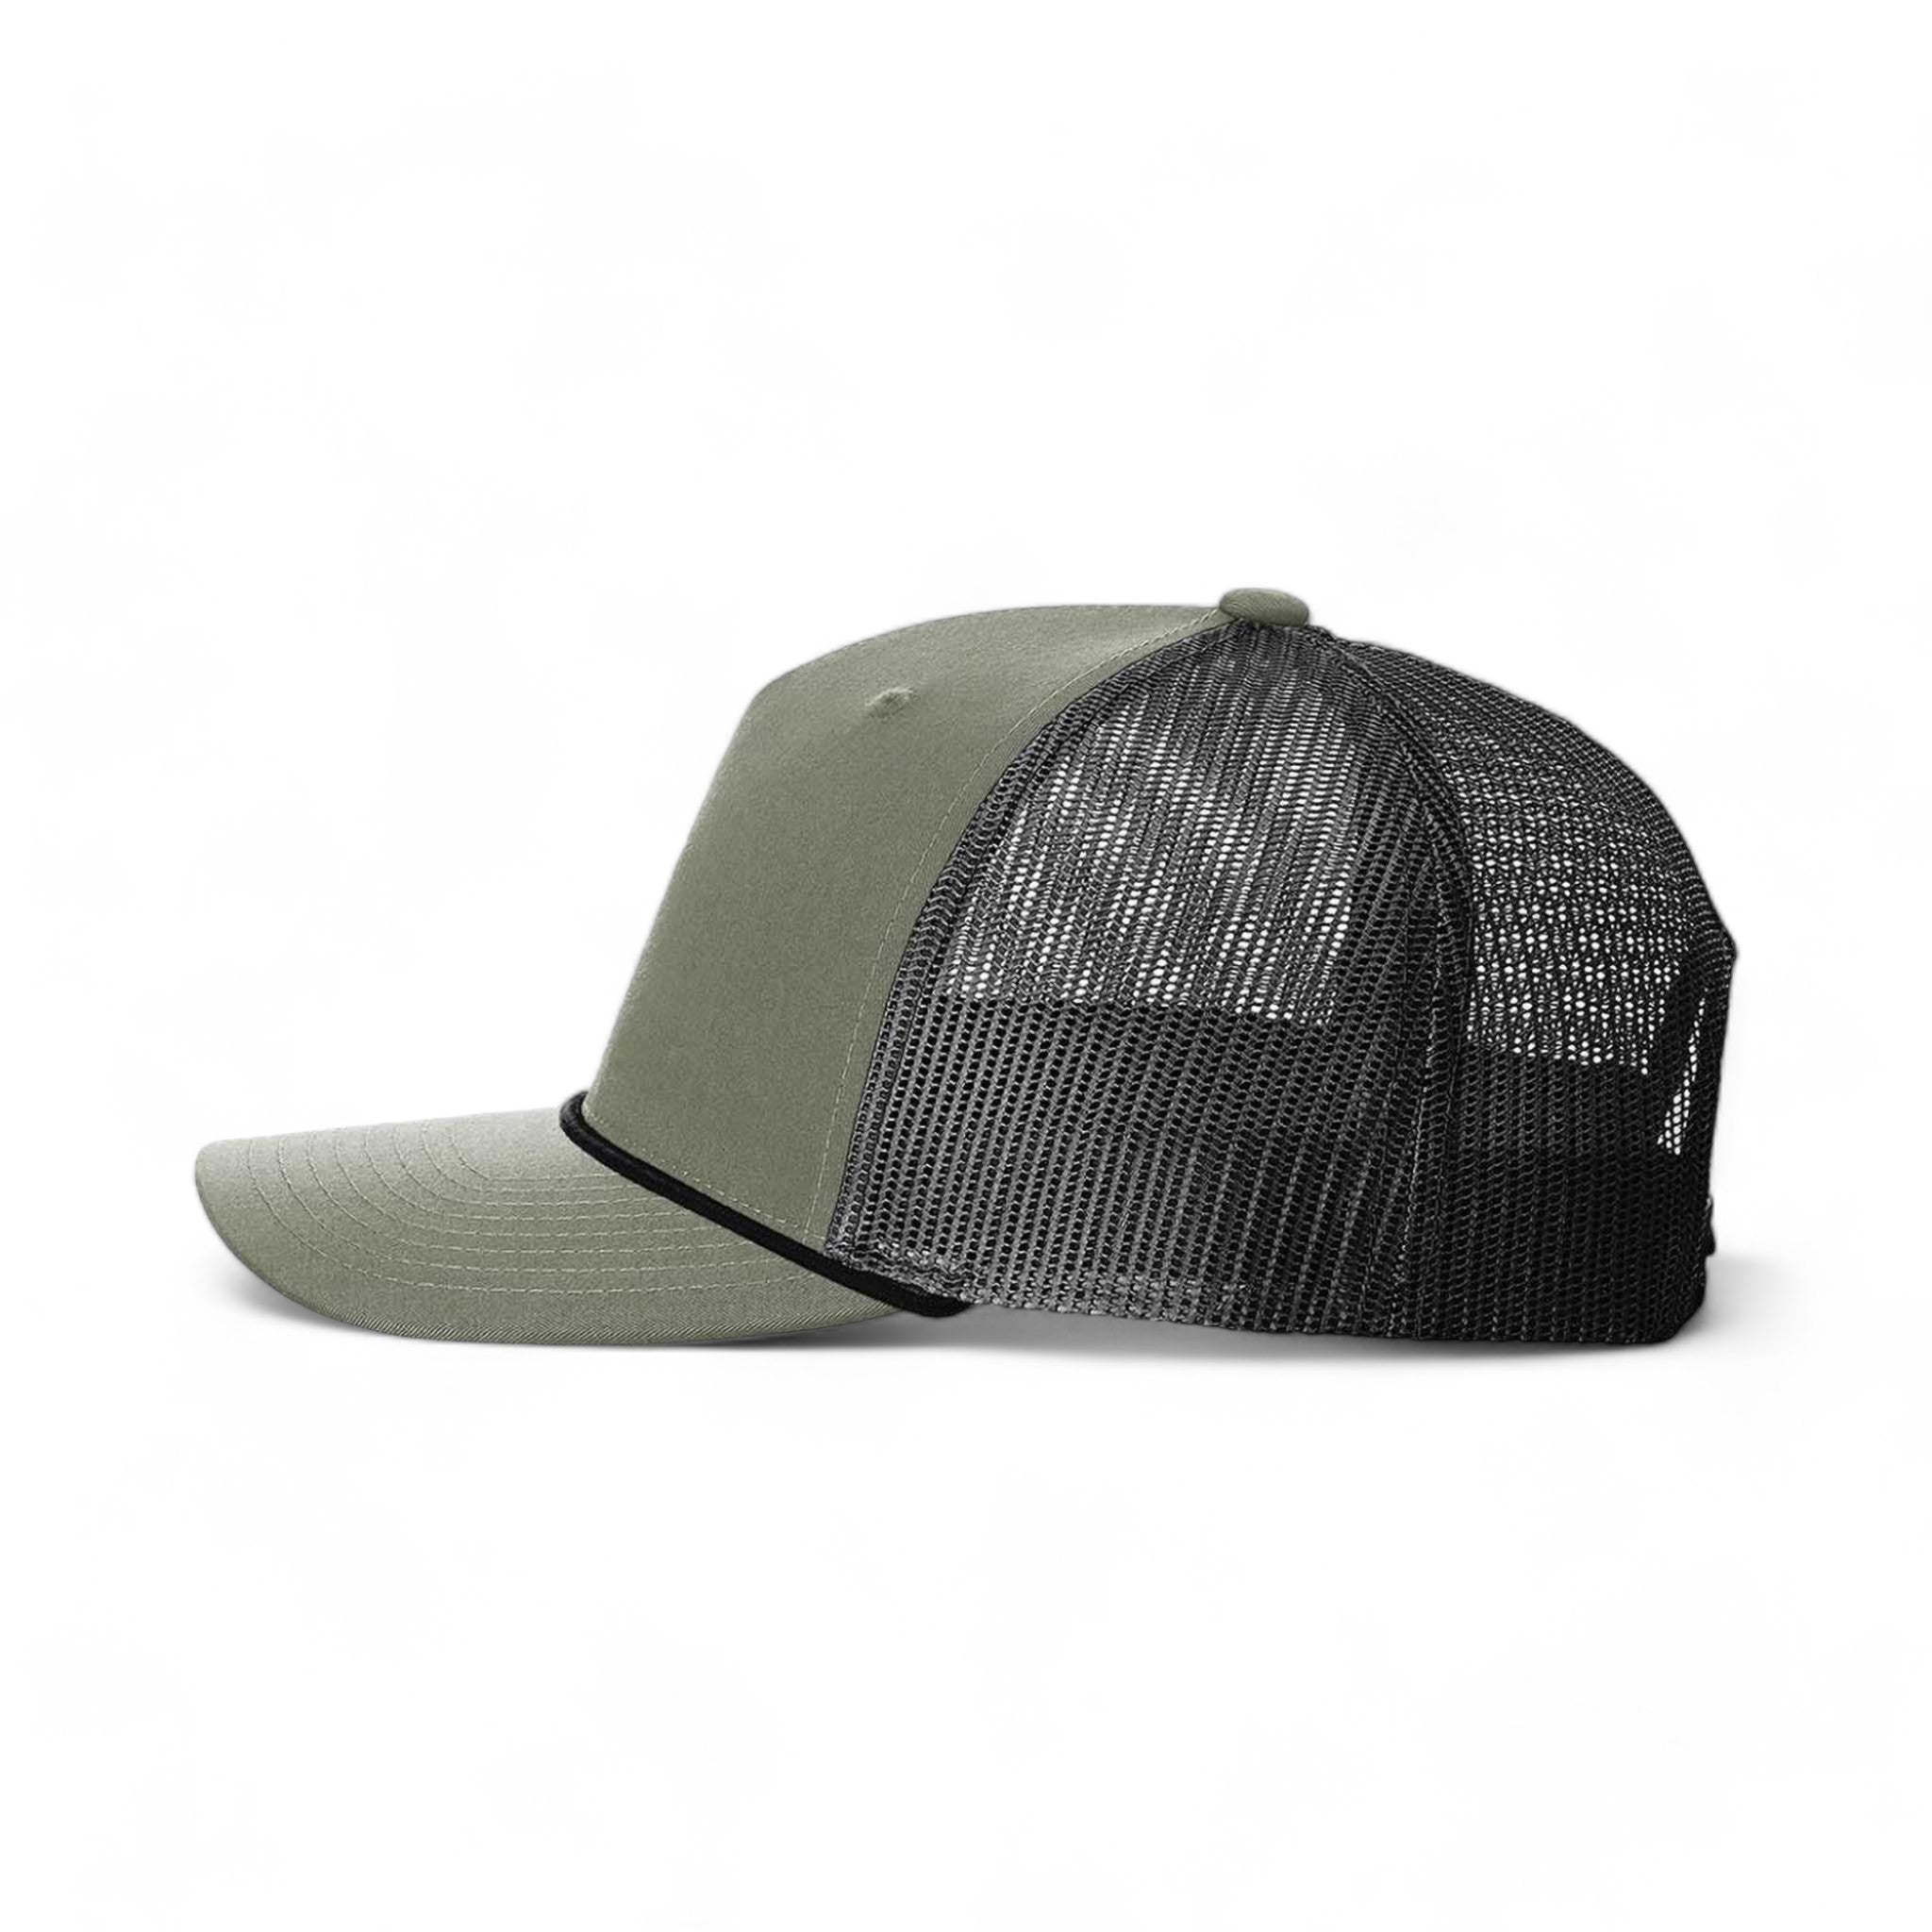 Side view of Richardson 112FPR custom hat in loden green and black